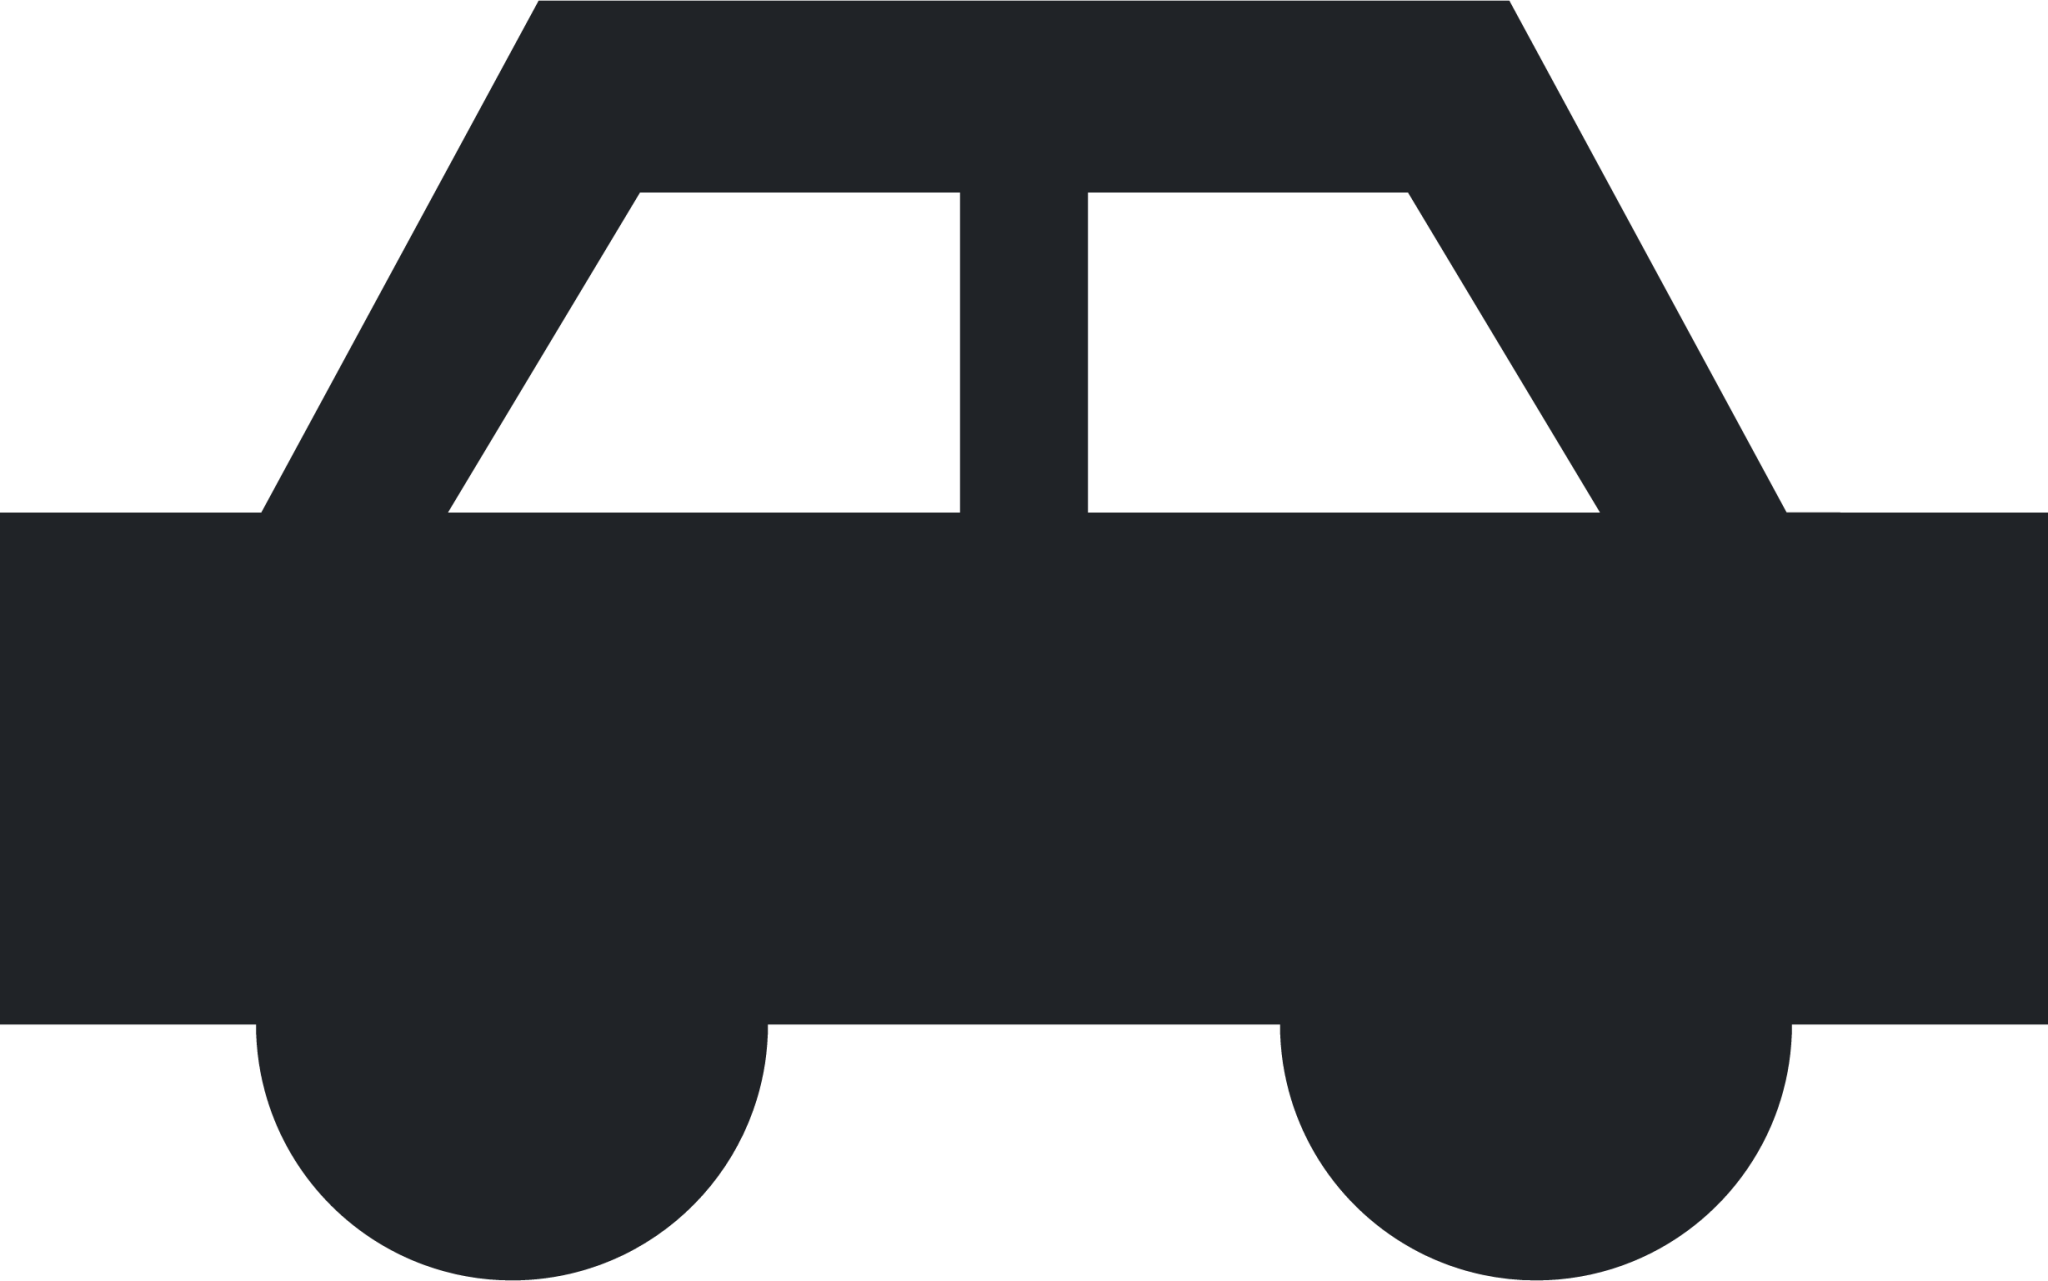 car2 (sharp filled) icon